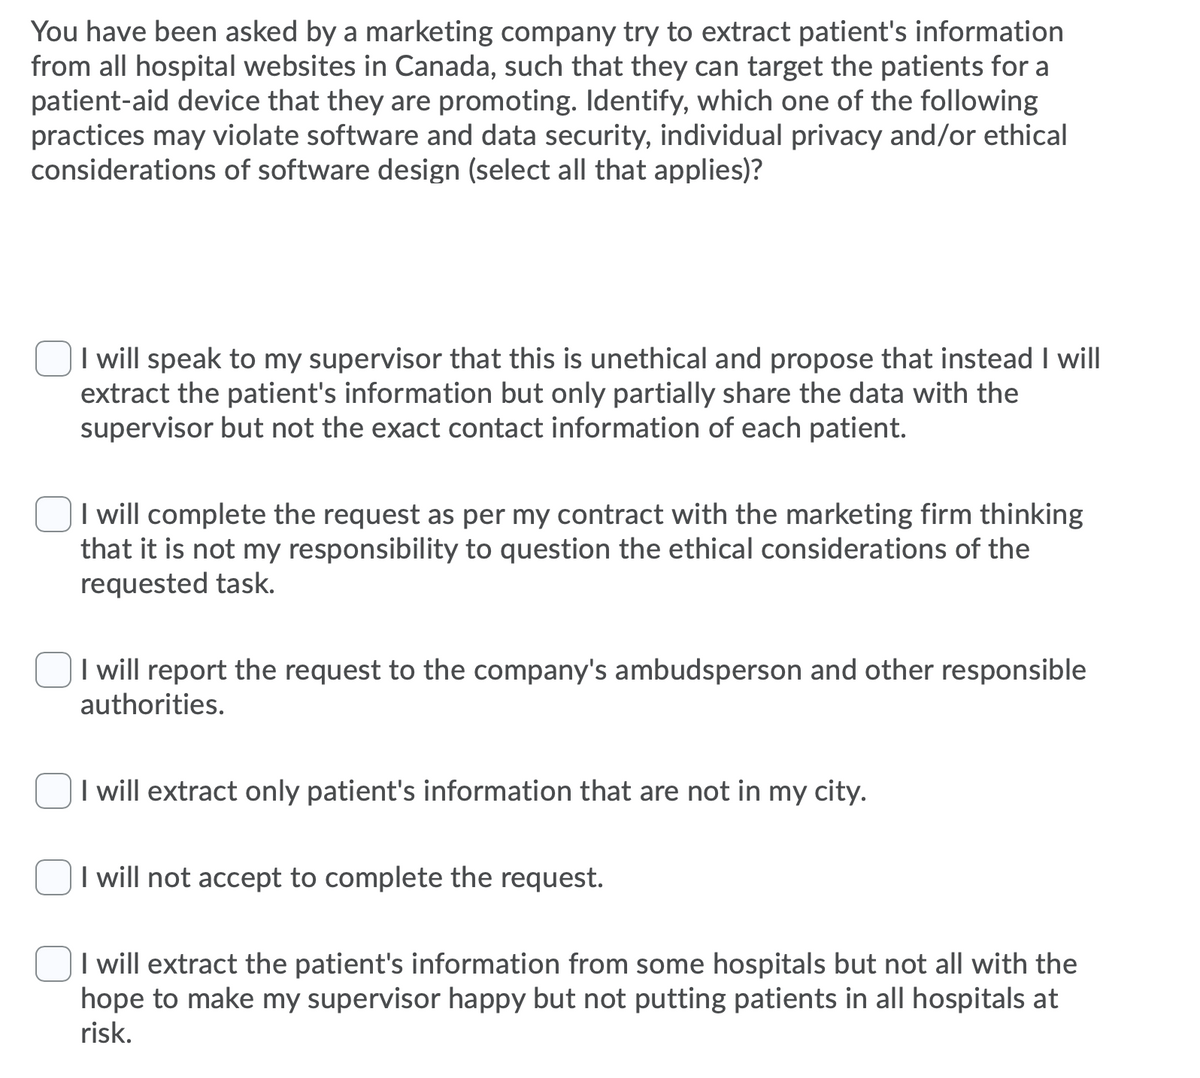 You have been asked by a marketing company try to extract patient's information
from all hospital websites in Canada, such that they can target the patients for a
patient-aid device that they are promoting. Identify, which one of the following
practices may violate software and data security, individual privacy and/or ethical
considerations of software design (select all that applies)?
I will speak to my supervisor that this is unethical and propose that instead I will
extract the patient's information but only partially share the data with the
supervisor but not the exact contact information of each patient.
I will complete the request as per my contract with the marketing firm thinking
that it is not my responsibility to question the ethical considerations of the
requested task.
I will report the request to the company's ambudsperson and other responsible
authorities.
I will extract only patient's information that are not in my city.
I will not accept to complete the request.
I will extract the patient's information from some hospitals but not all with the
hope to make my supervisor happy but not putting patients in all hospitals at
risk.
